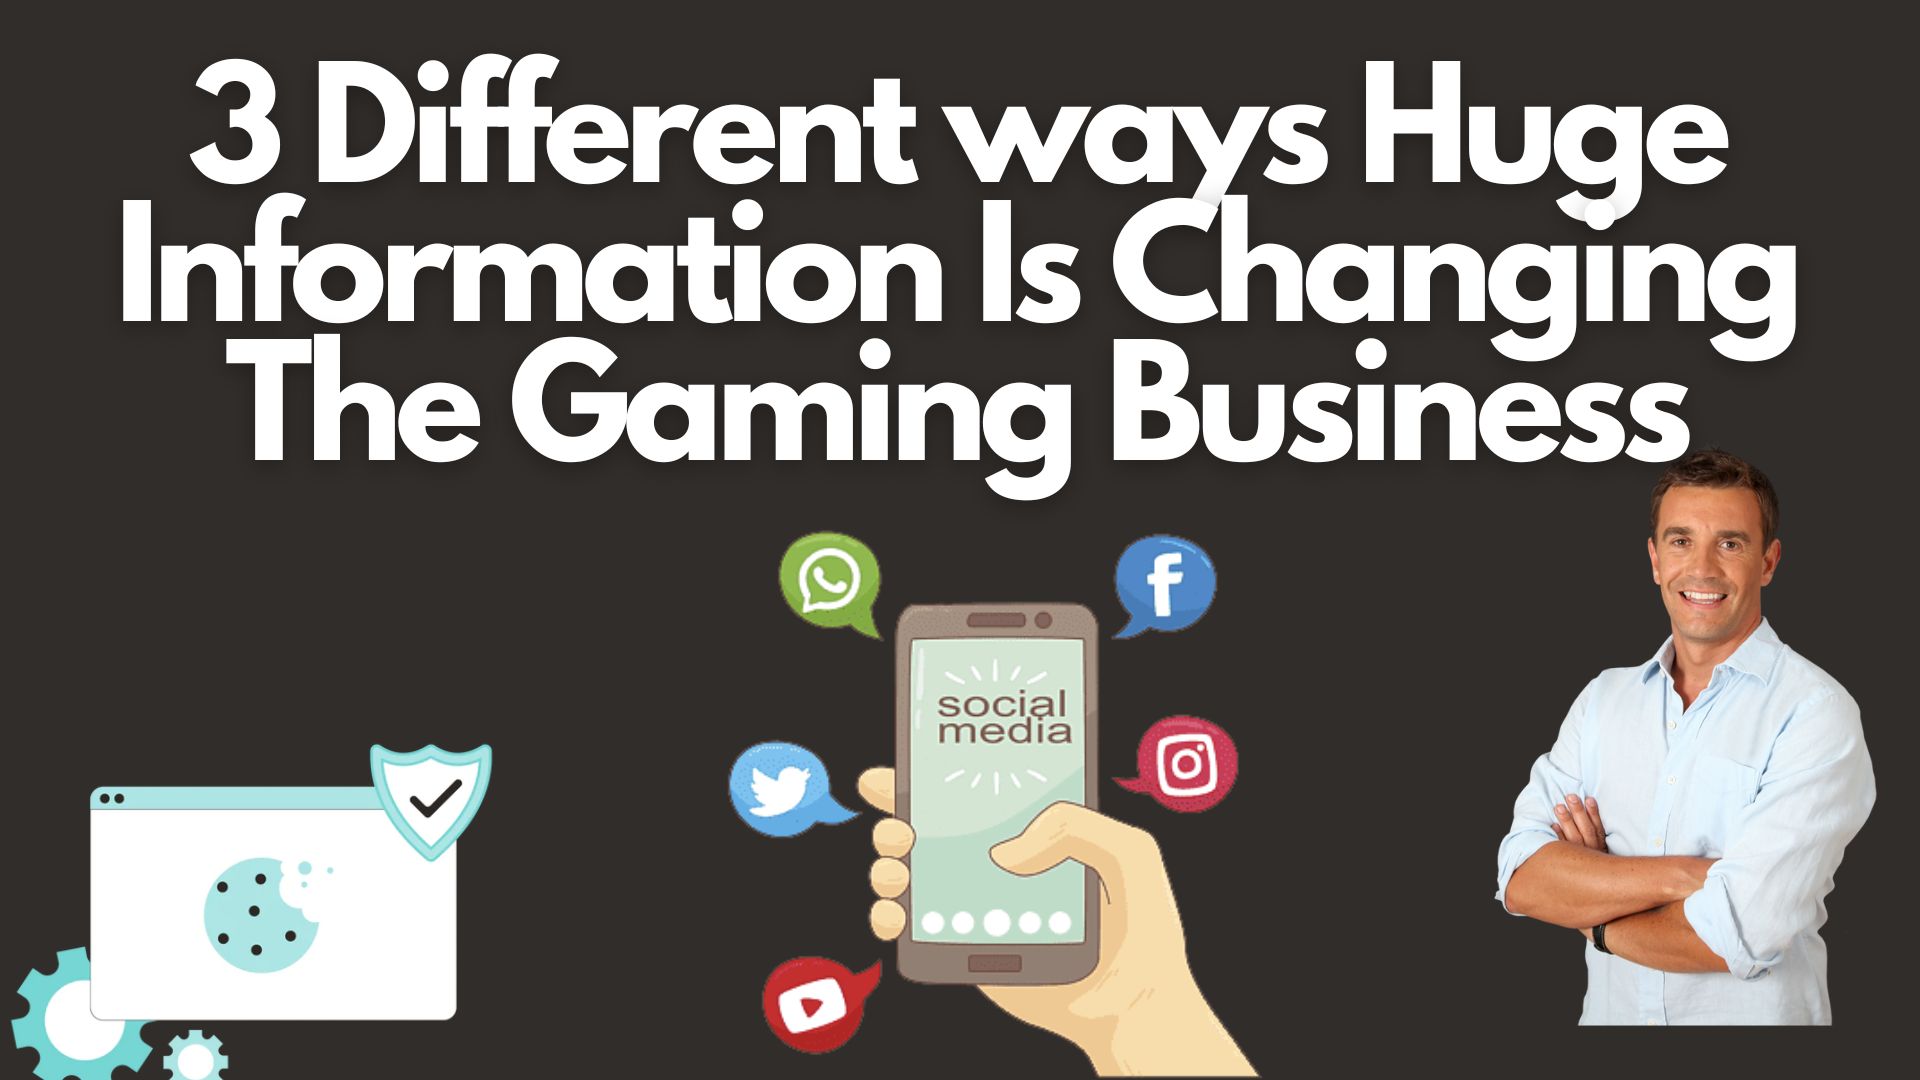 3 different ways huge information is changing the gaming business